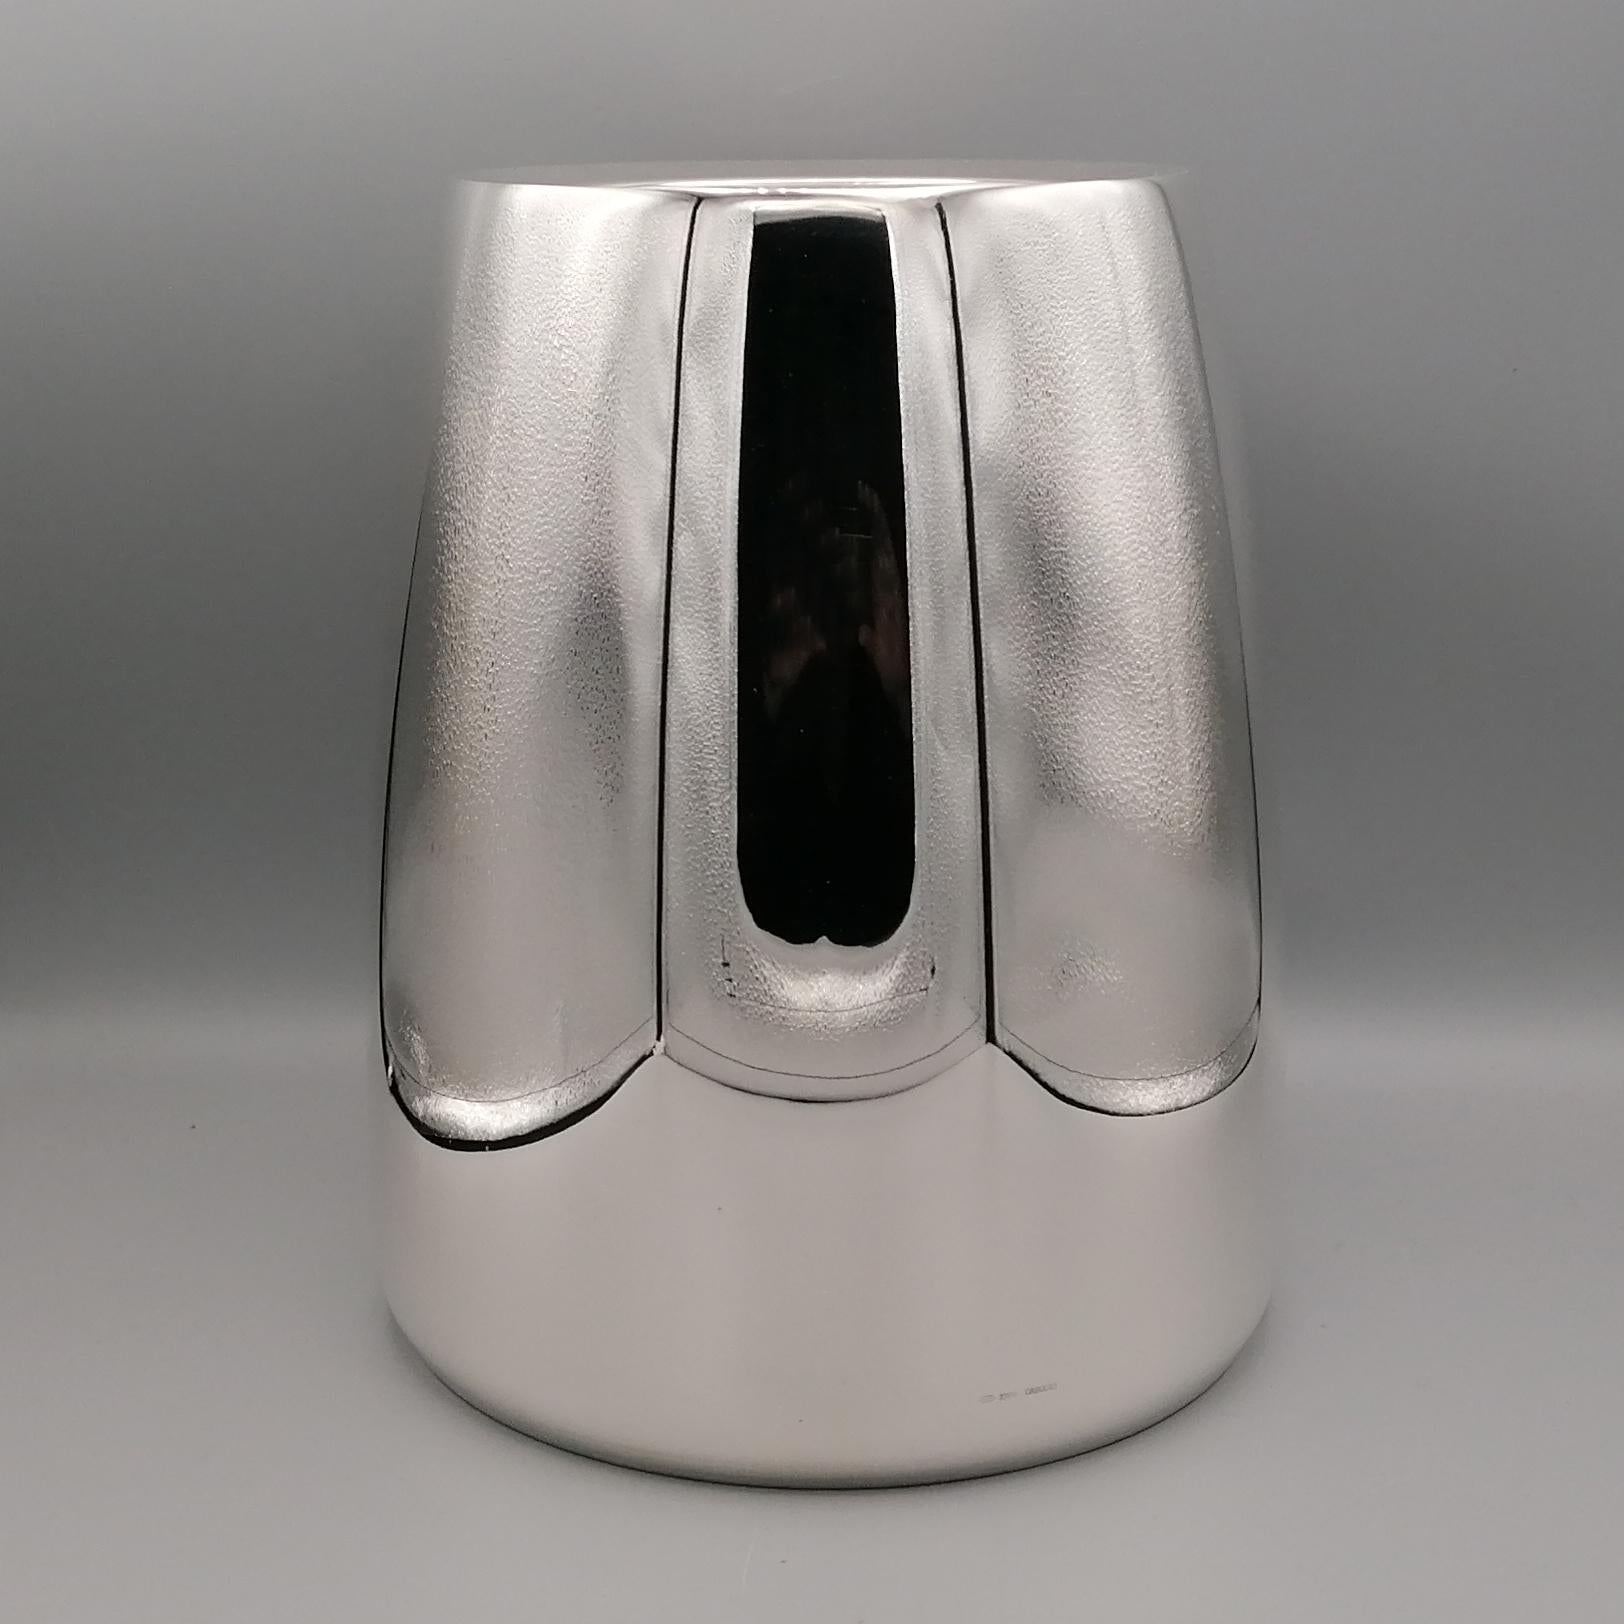 925 sterling silver vase made from a silver sheet and shaped.
Completely smooth, the vase has a base diameter of cm. 20 (7.9 inches) and the mouth of d. 16 (6.3 inches).
Having been made with a double chamber, i.e. with a cavity between the